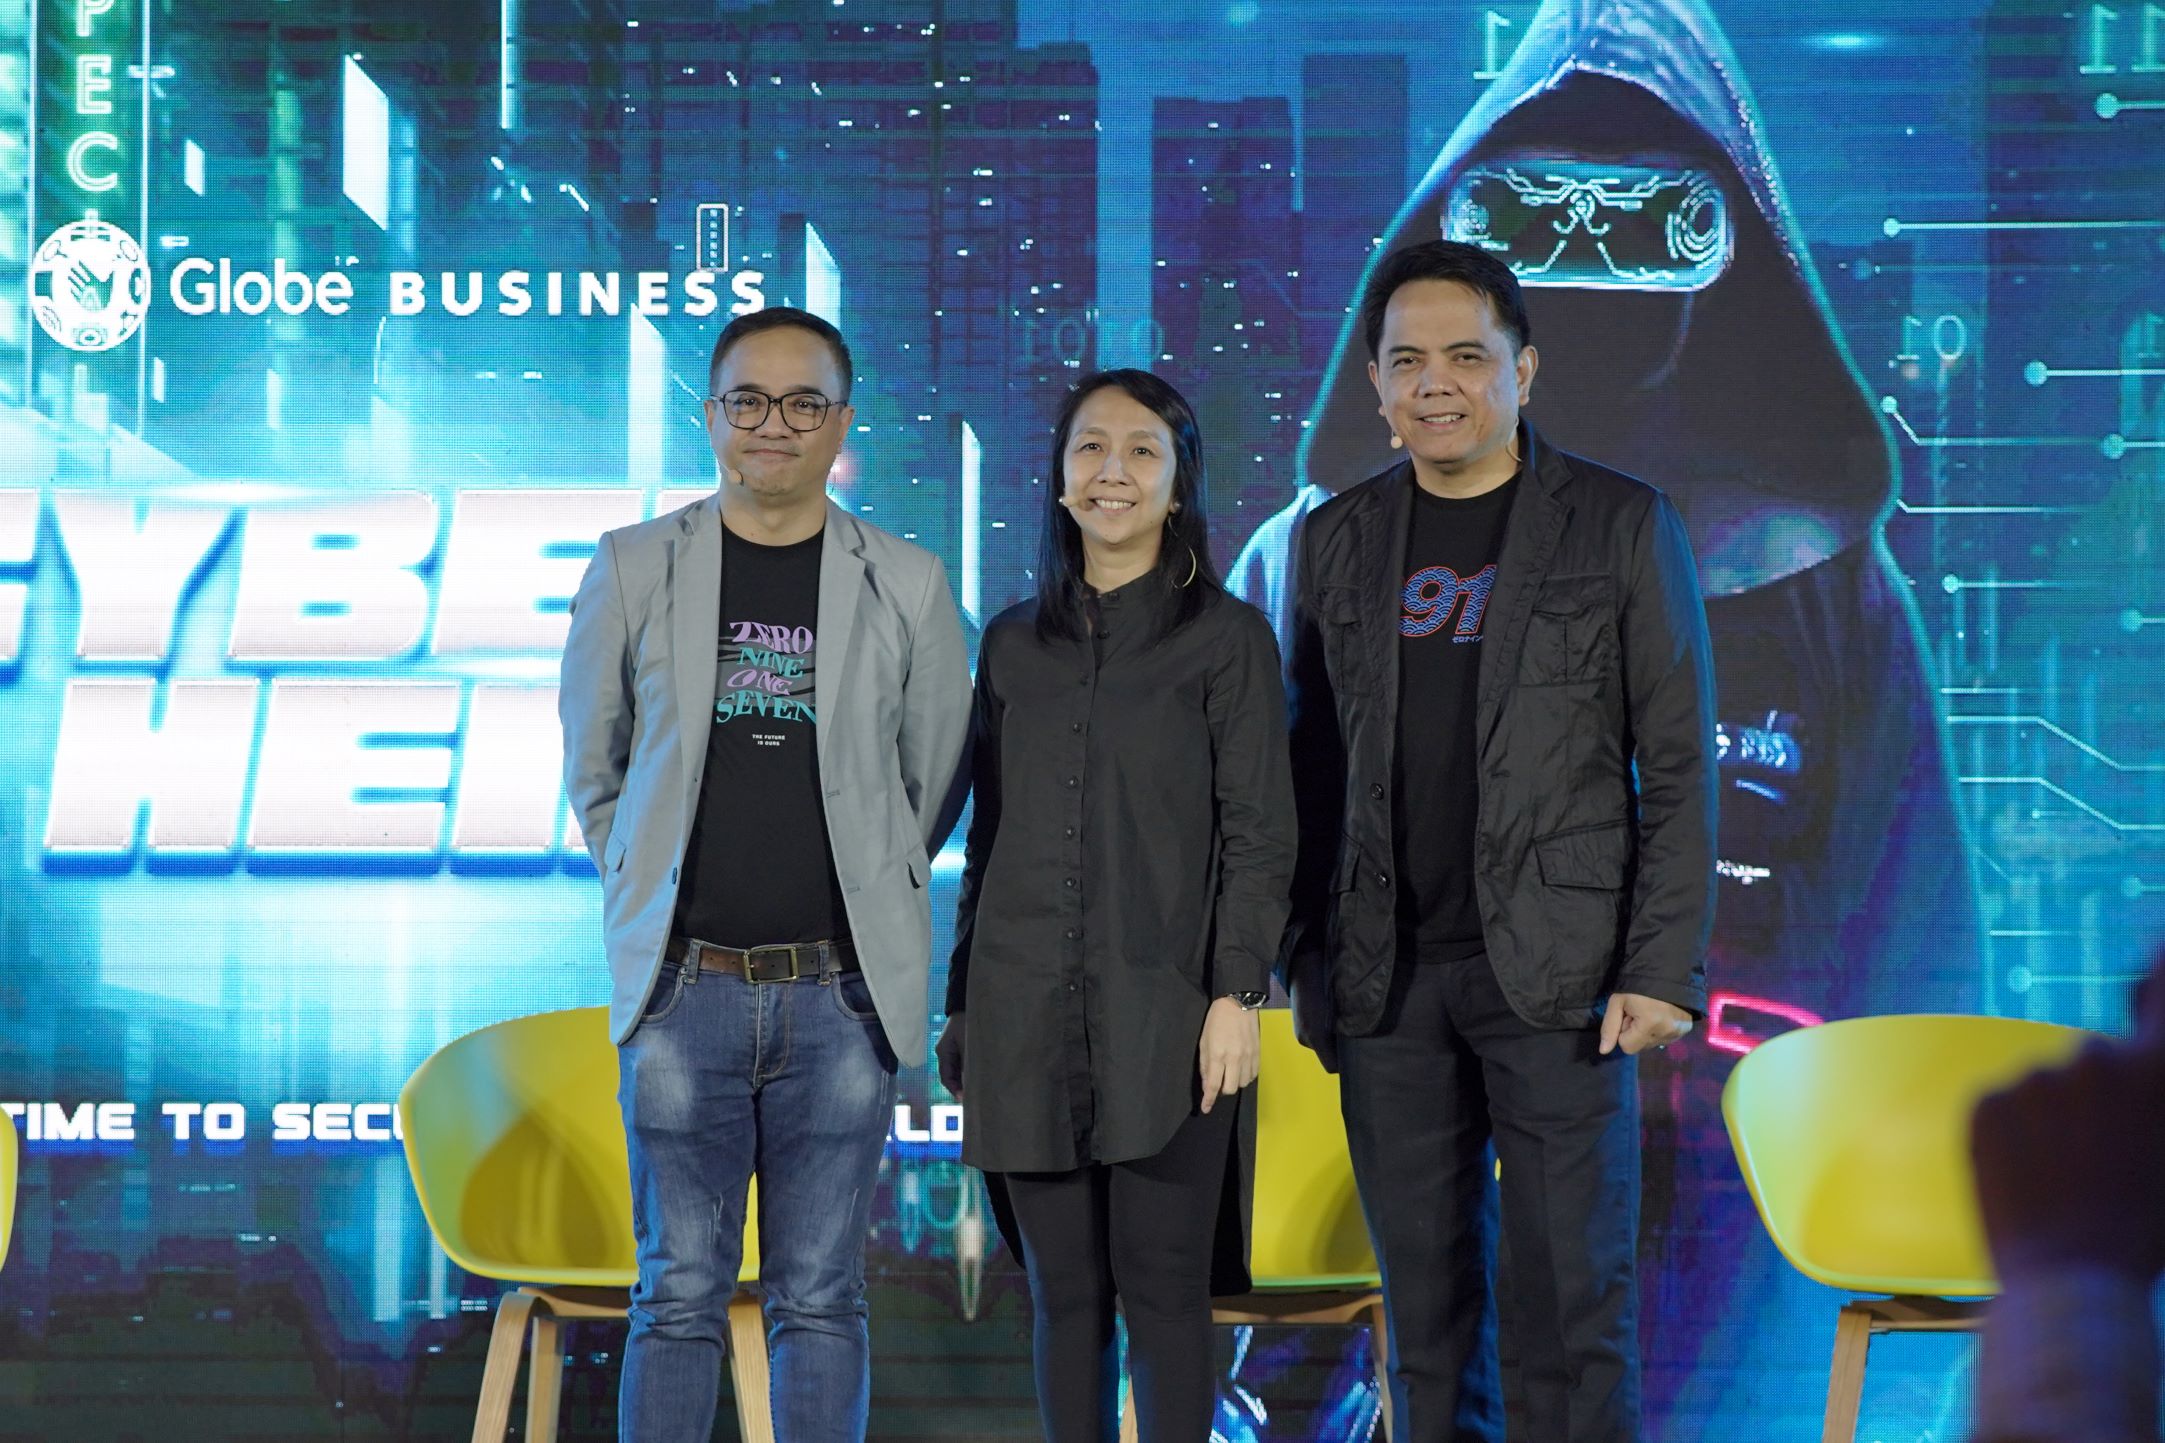 Marlon Cruz, Globe Senior Director for the Services and Healthcare Sector; KD Dizon, Head of Globe Business; and Cocoy Claravall, Globe Business Head of Partner Ecosystem at the Globe Business CyberHeist event.